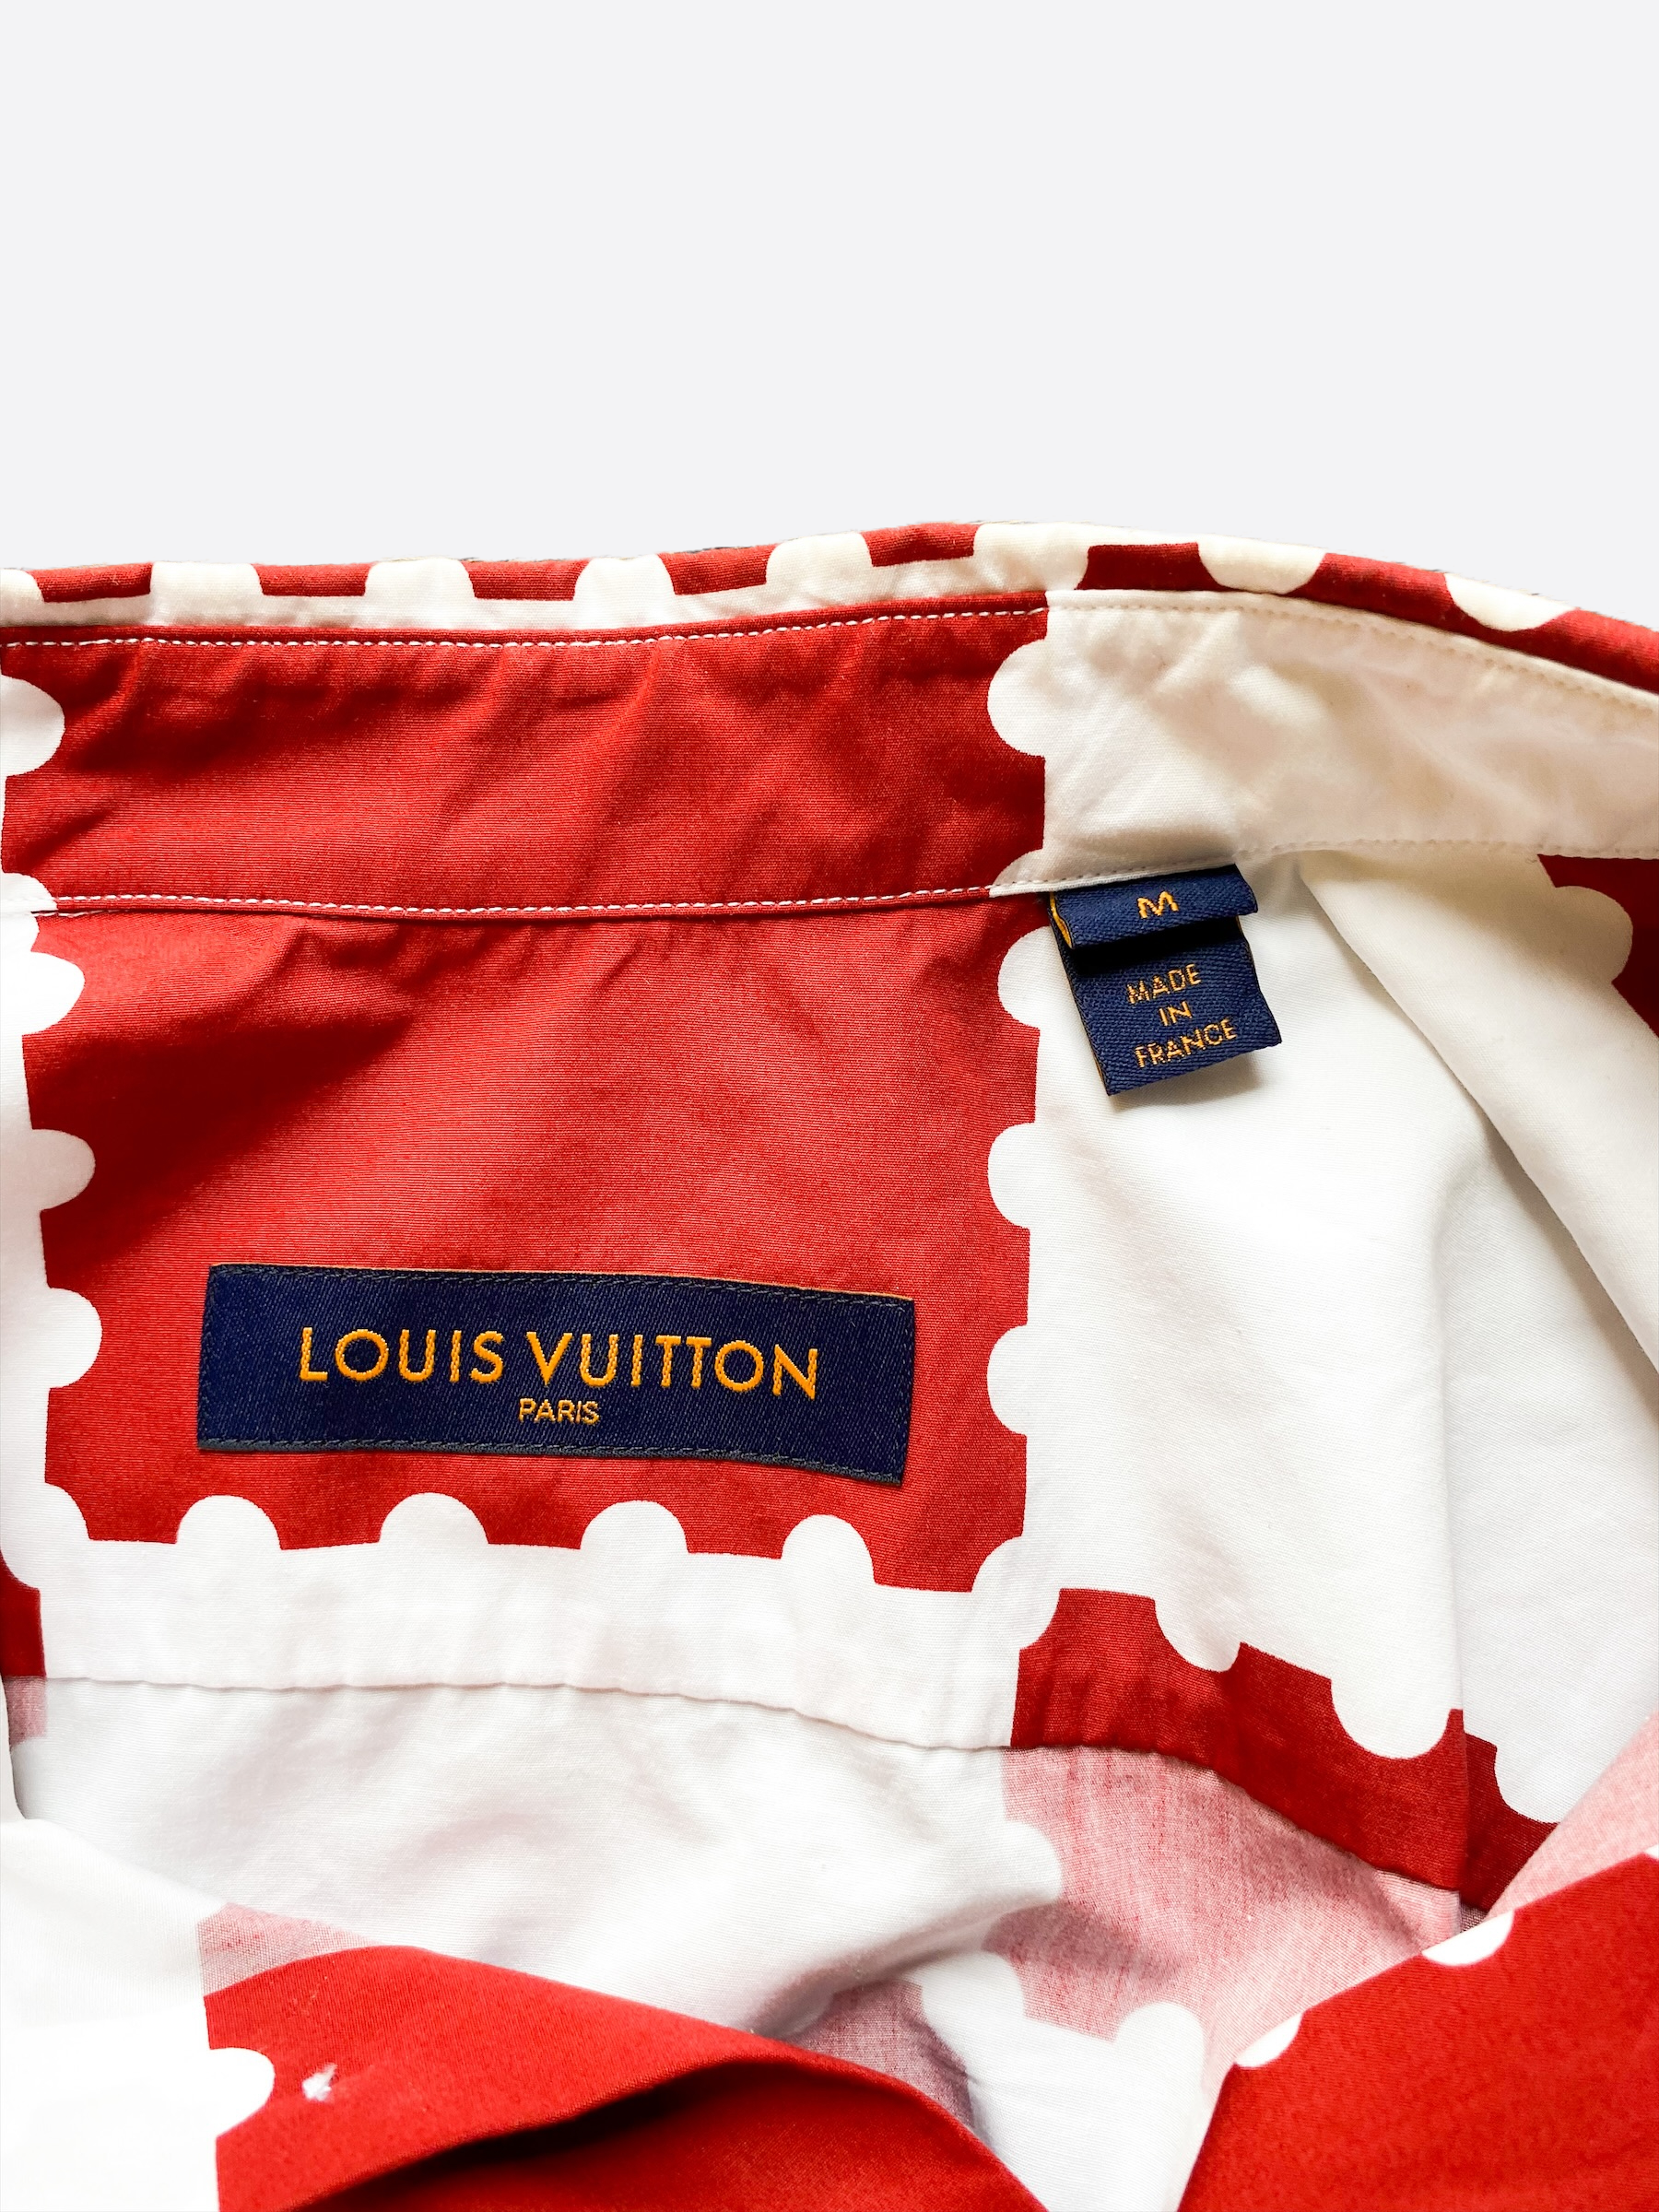 white and red louis vuitton shirt